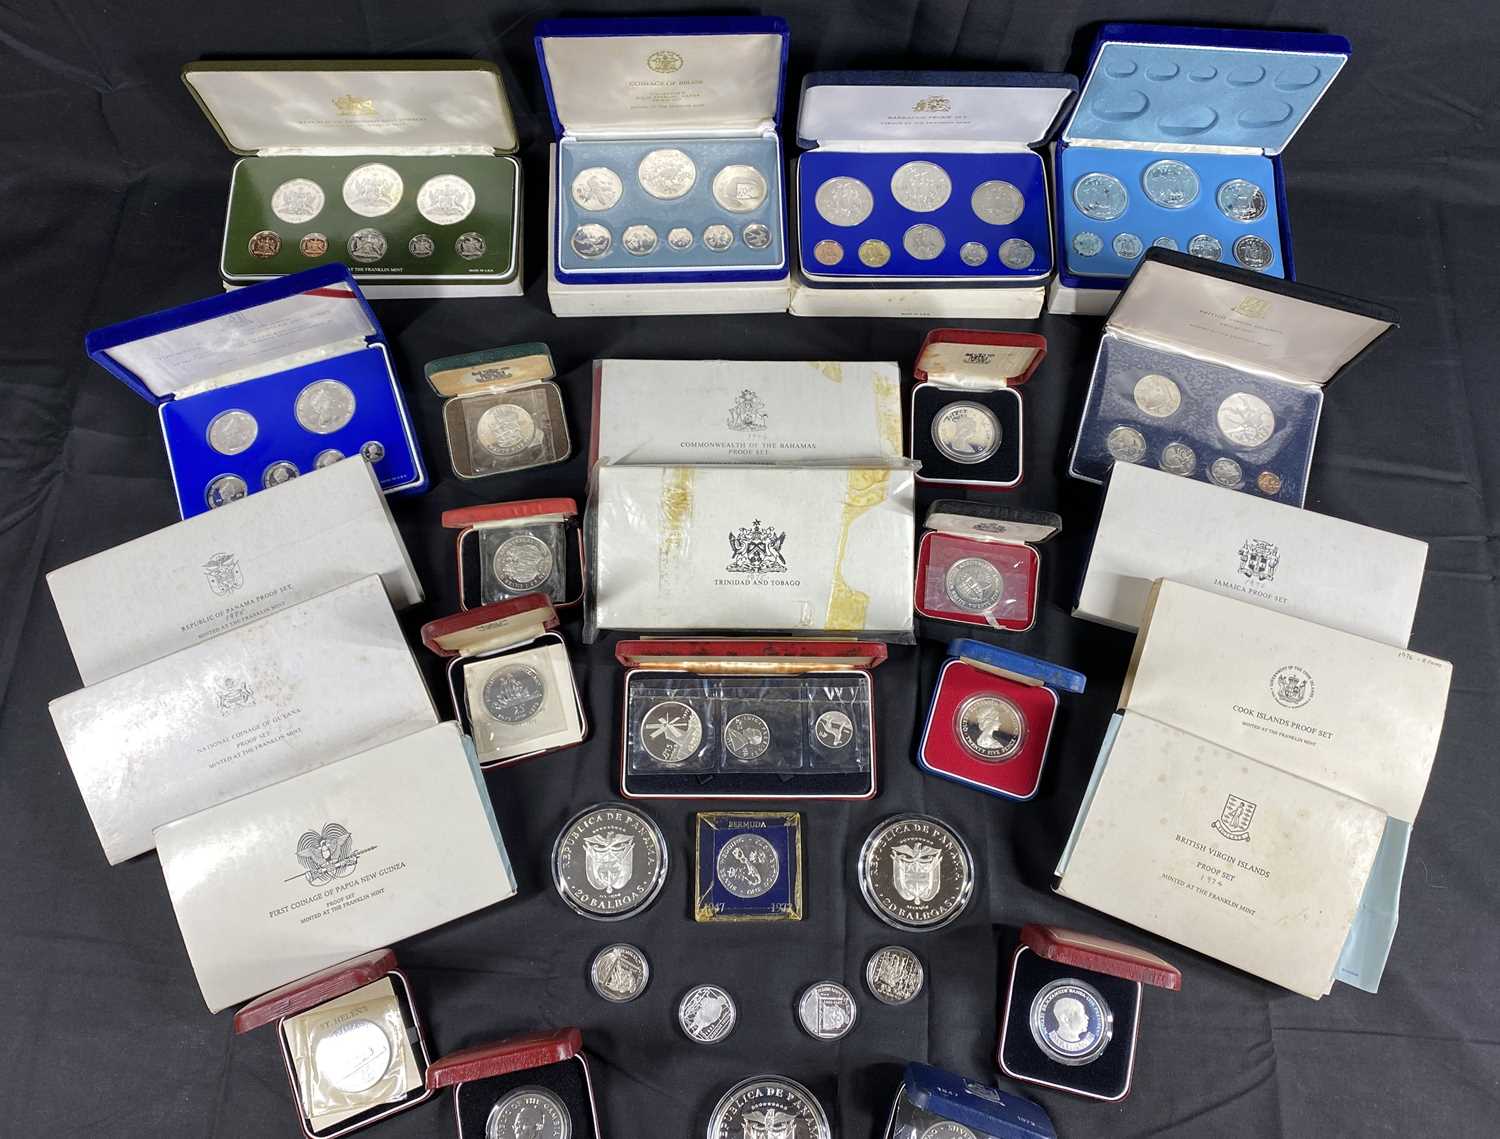 ROYAL MINT PROOF SILVER COINS, FRANKLIN MINT PROOF SILVER SETS, proof sets and other coins, the - Image 3 of 3